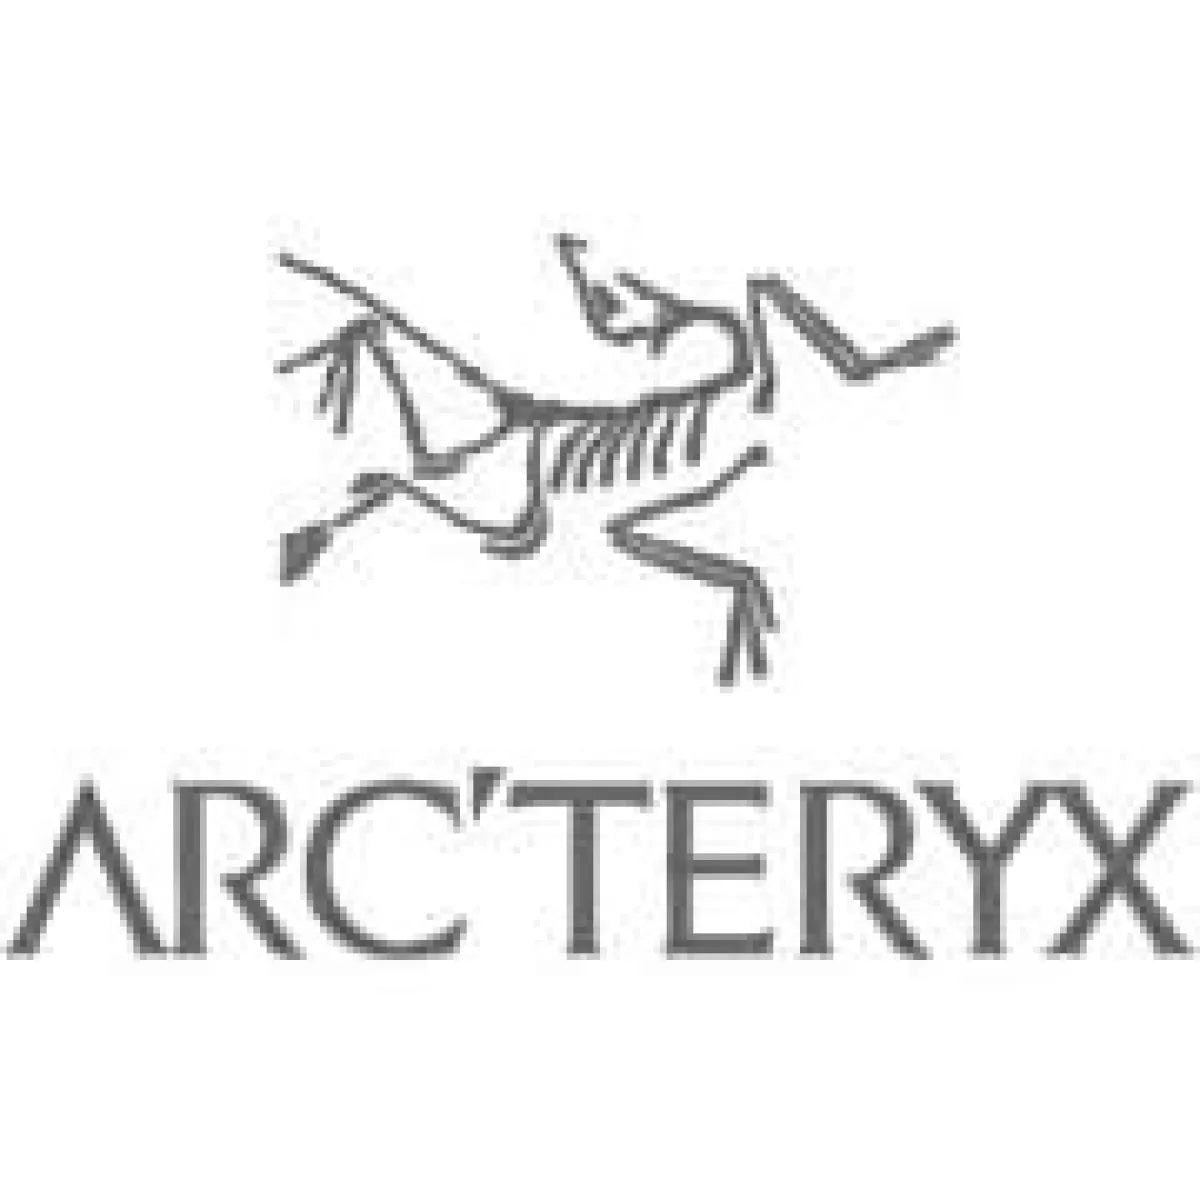 Arc'teryx – High Country Outfitters